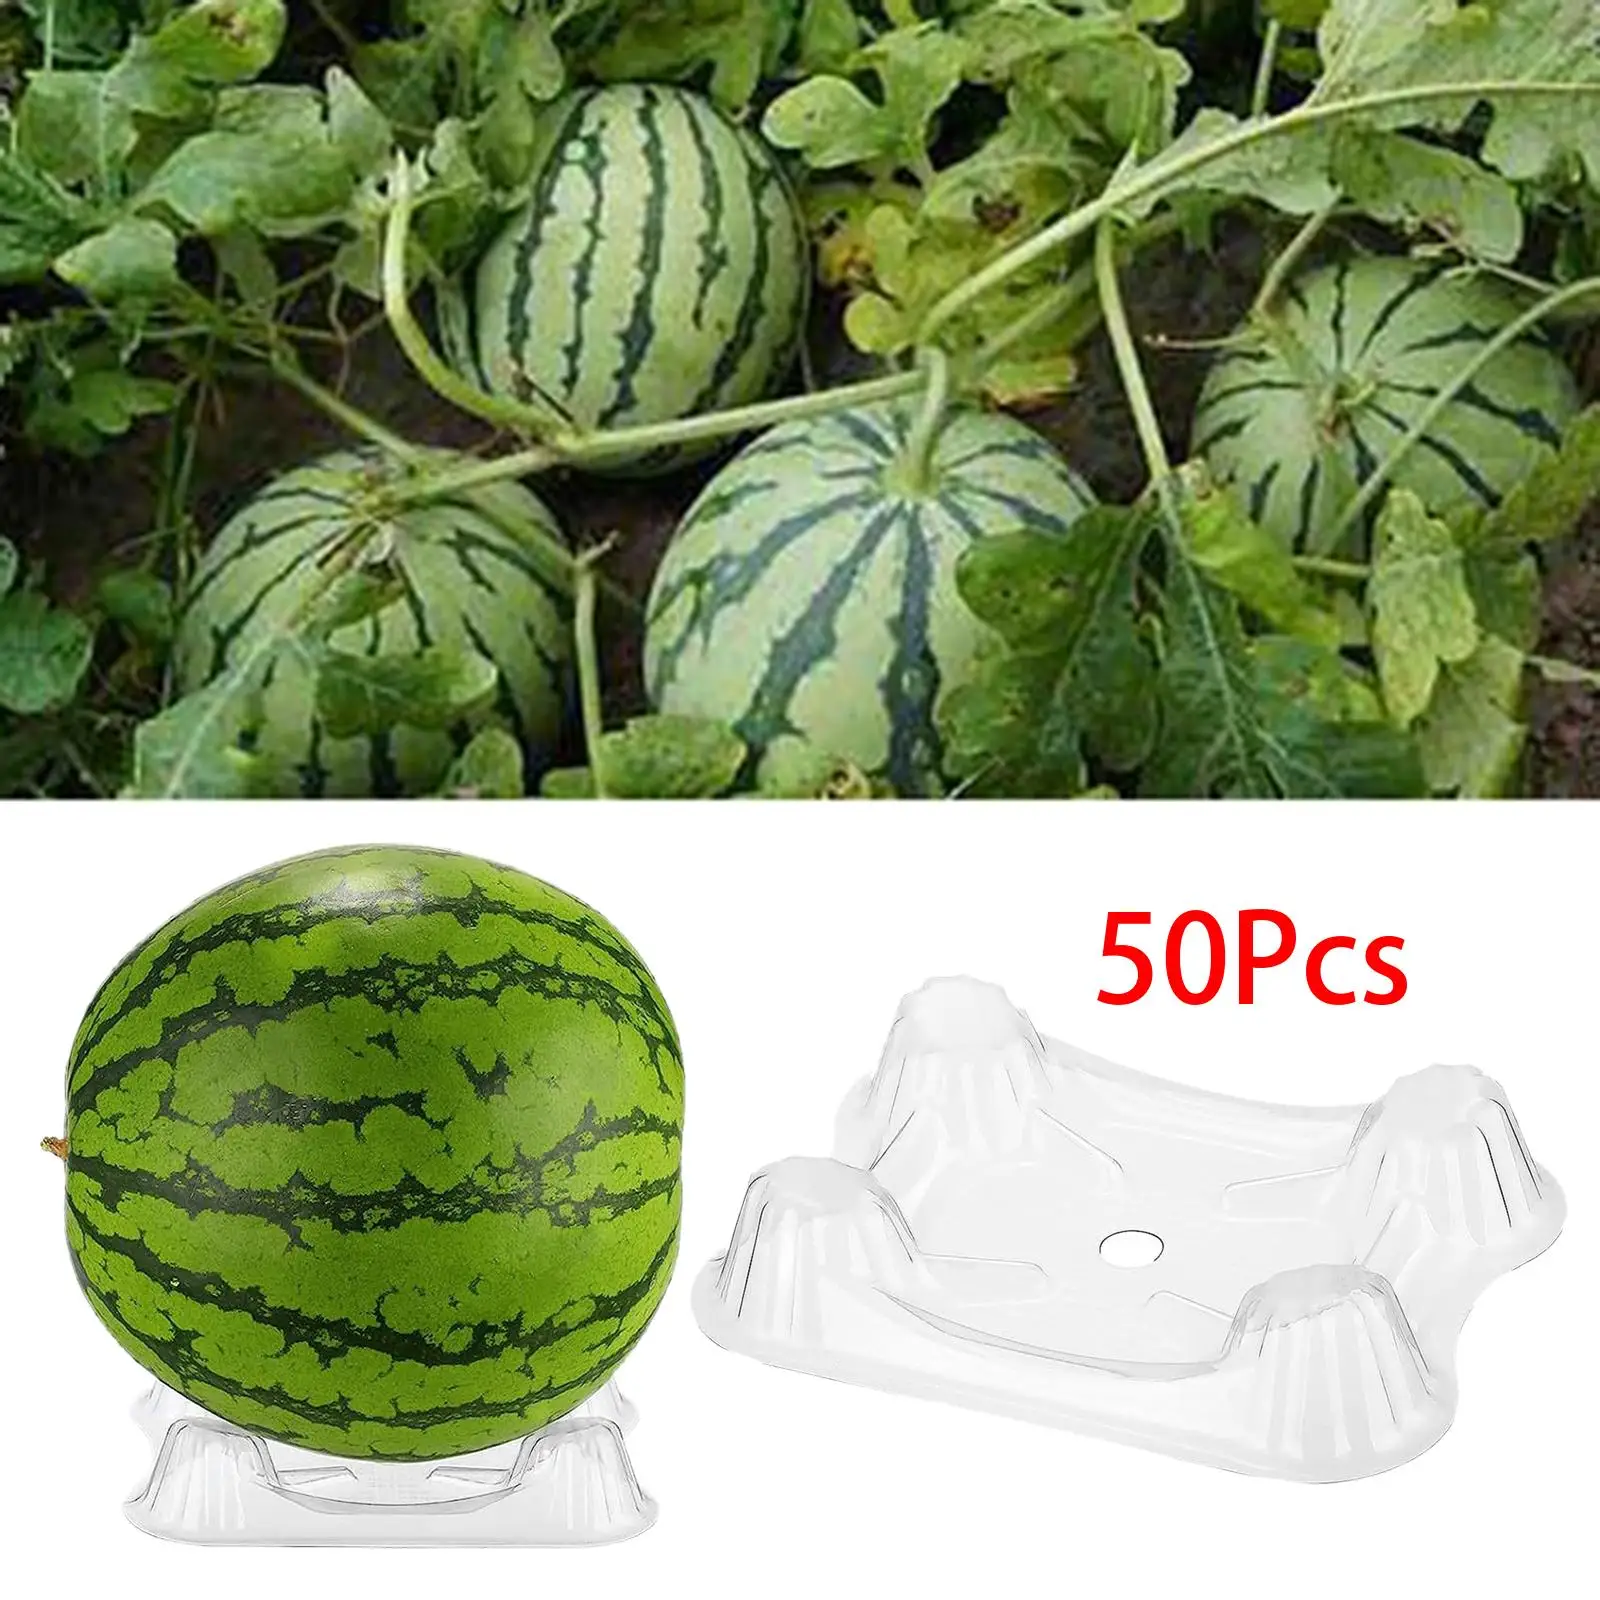 50x Melon Support Cradle for Gardening Protector Melon Support Watermelon Holder for Squash Vegetable Watermelon Strawberry Accs